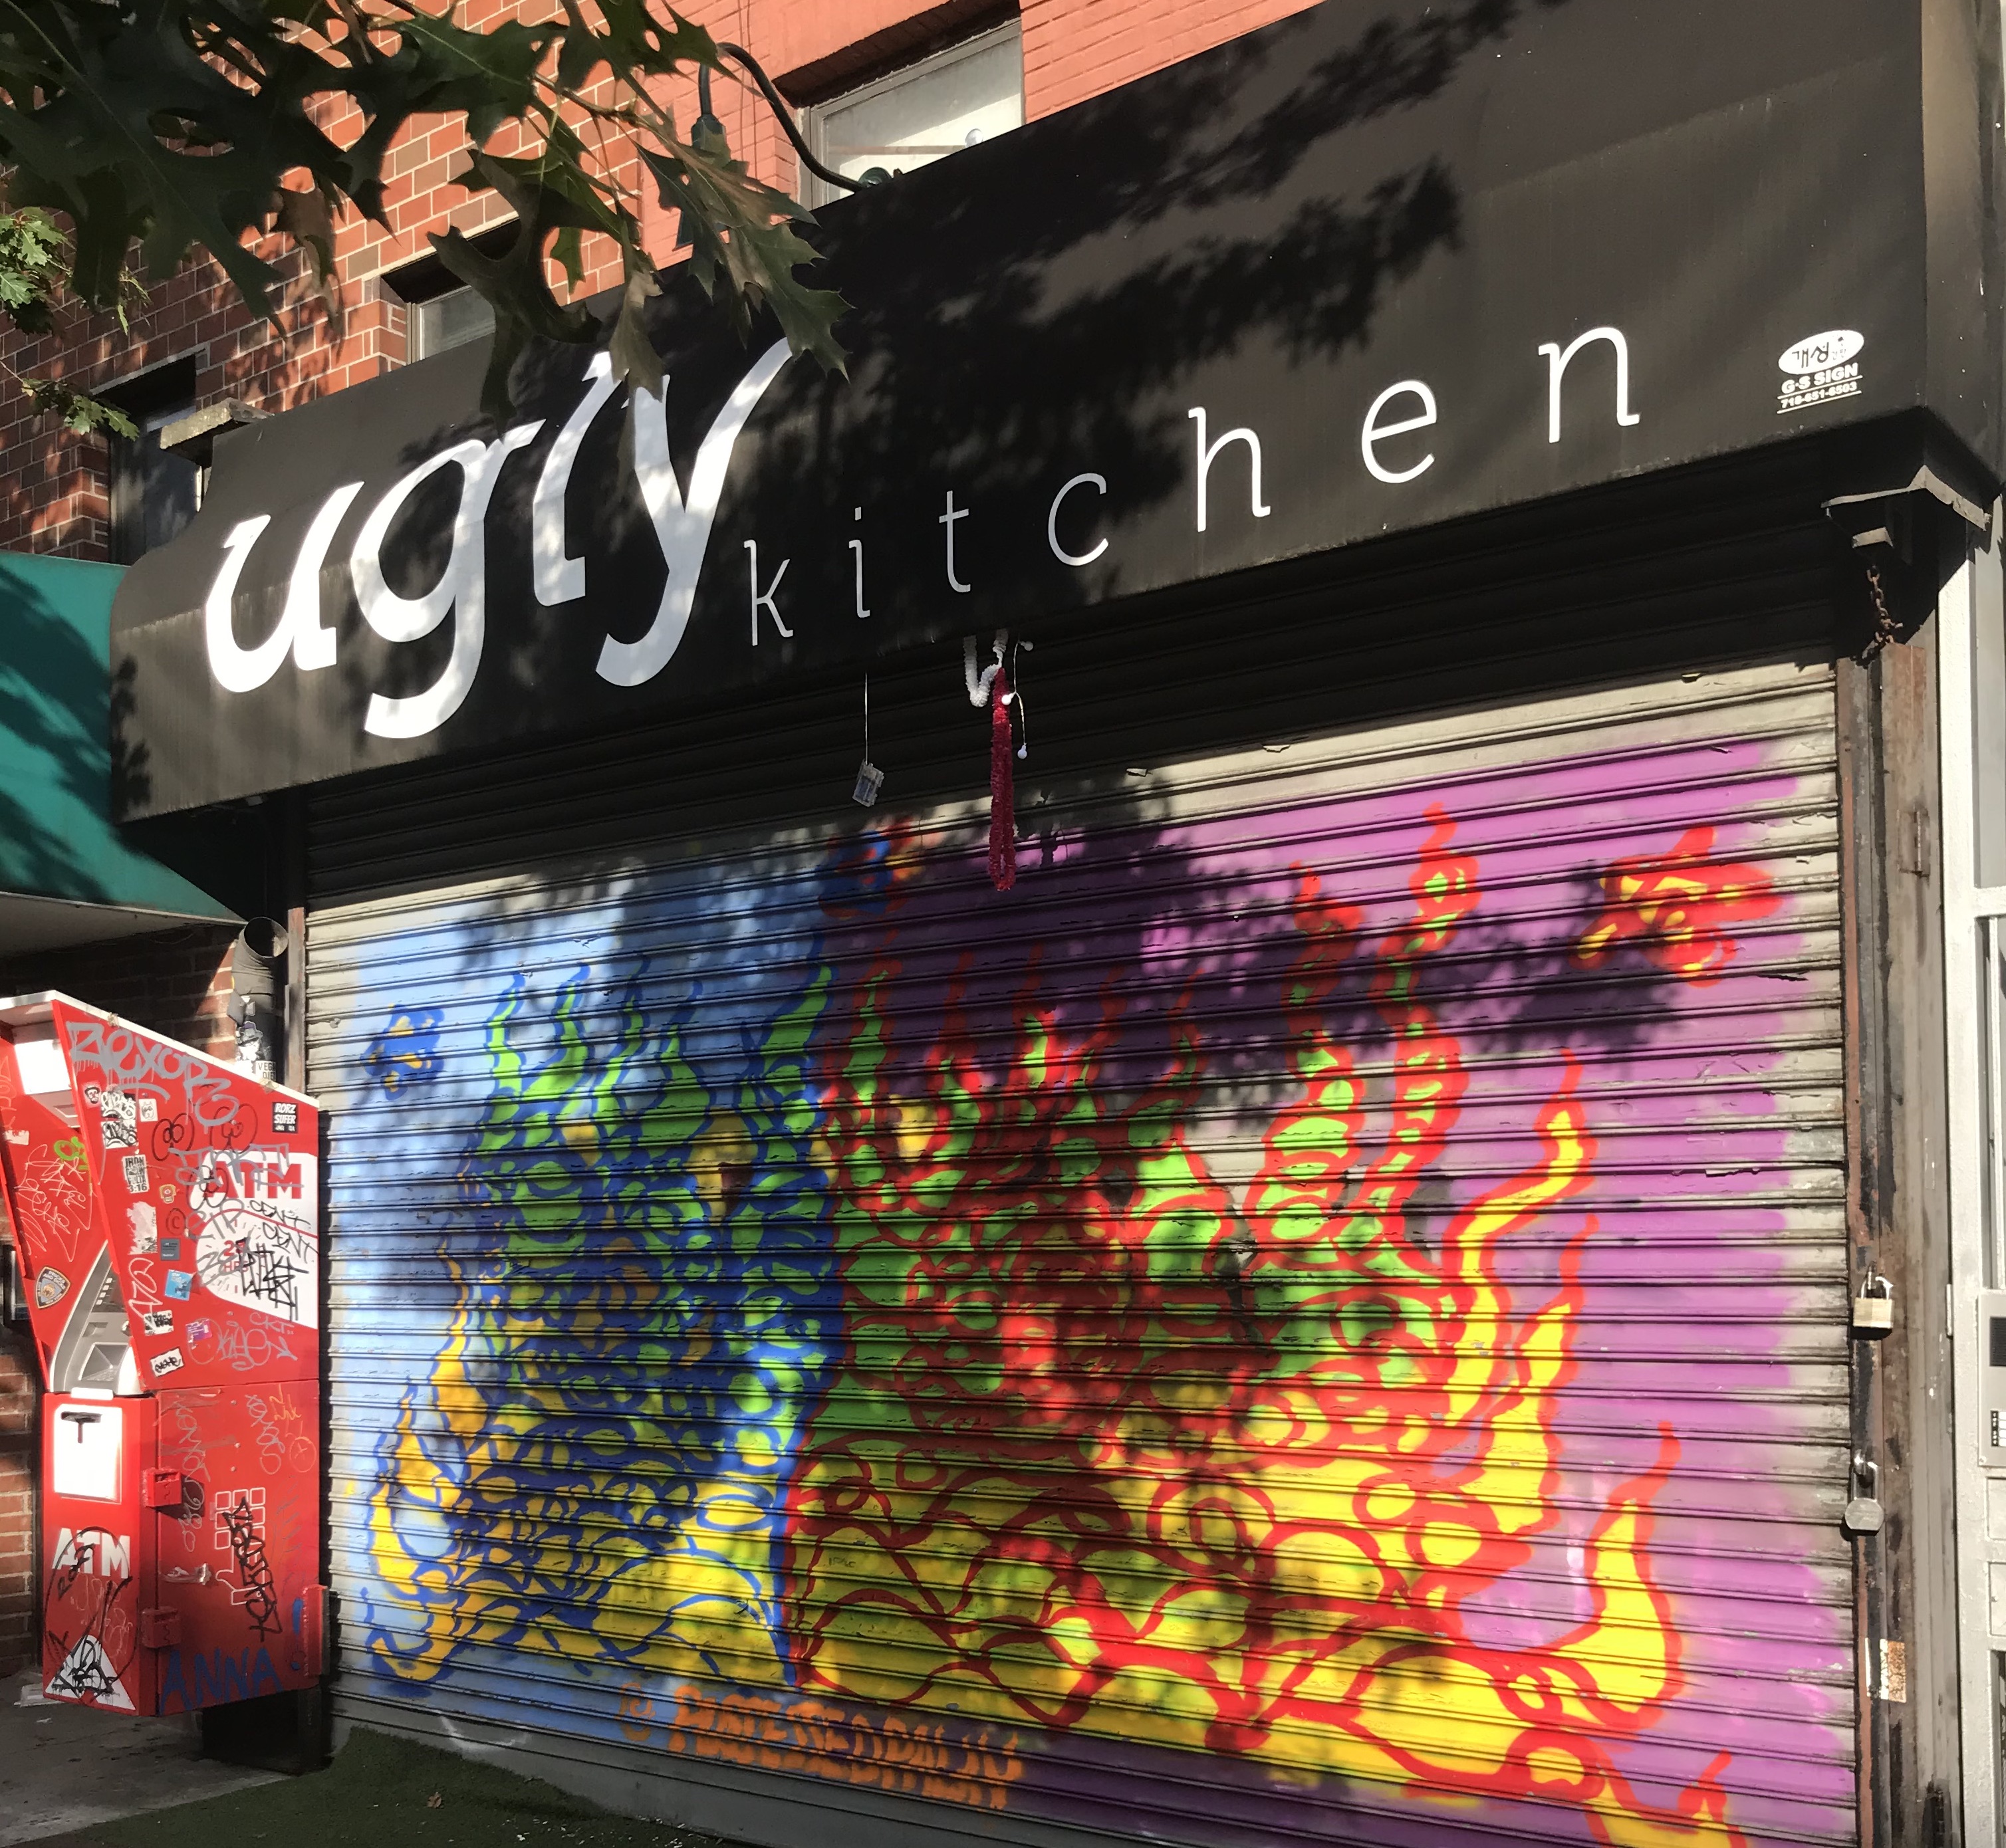 The exterior of a restaurant with a black awning and white lettering reading Ugly Kitchen. The front gate is pulled down with colorful graffiti in view on the gate. There is a red ATM to the left of the gate.